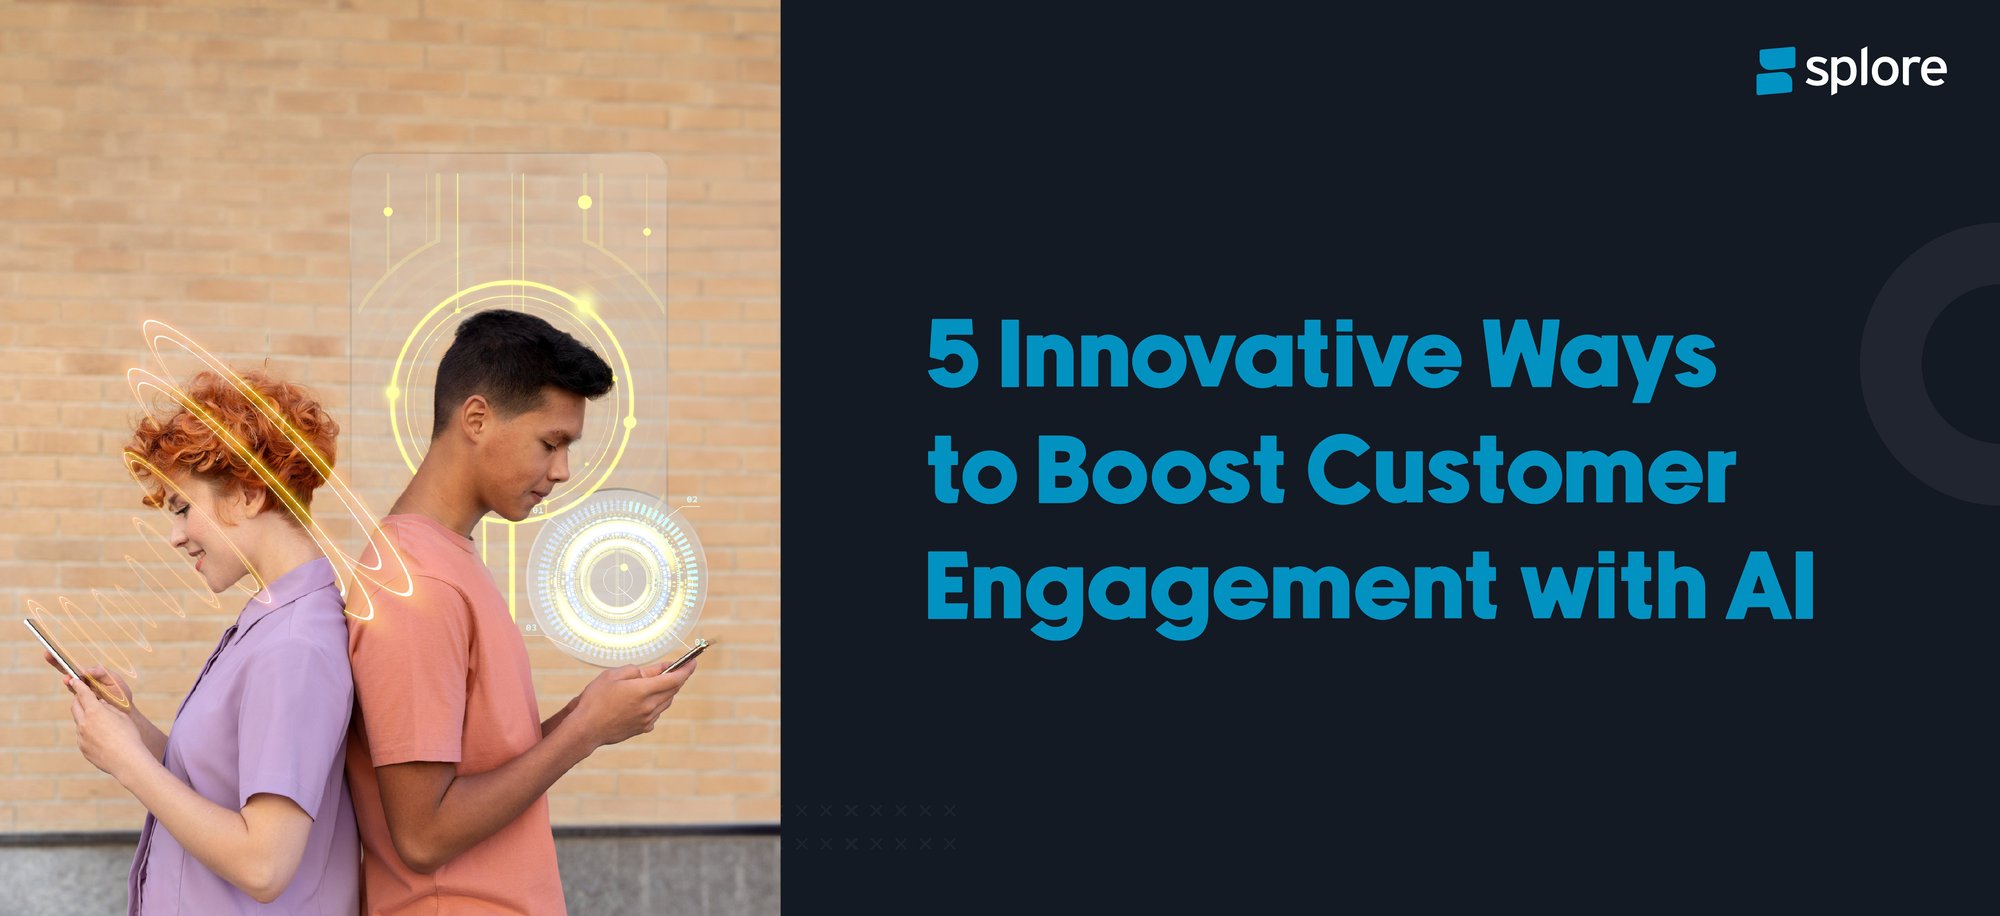 5 Innovative Ways to Boost Customer Engagement with AI